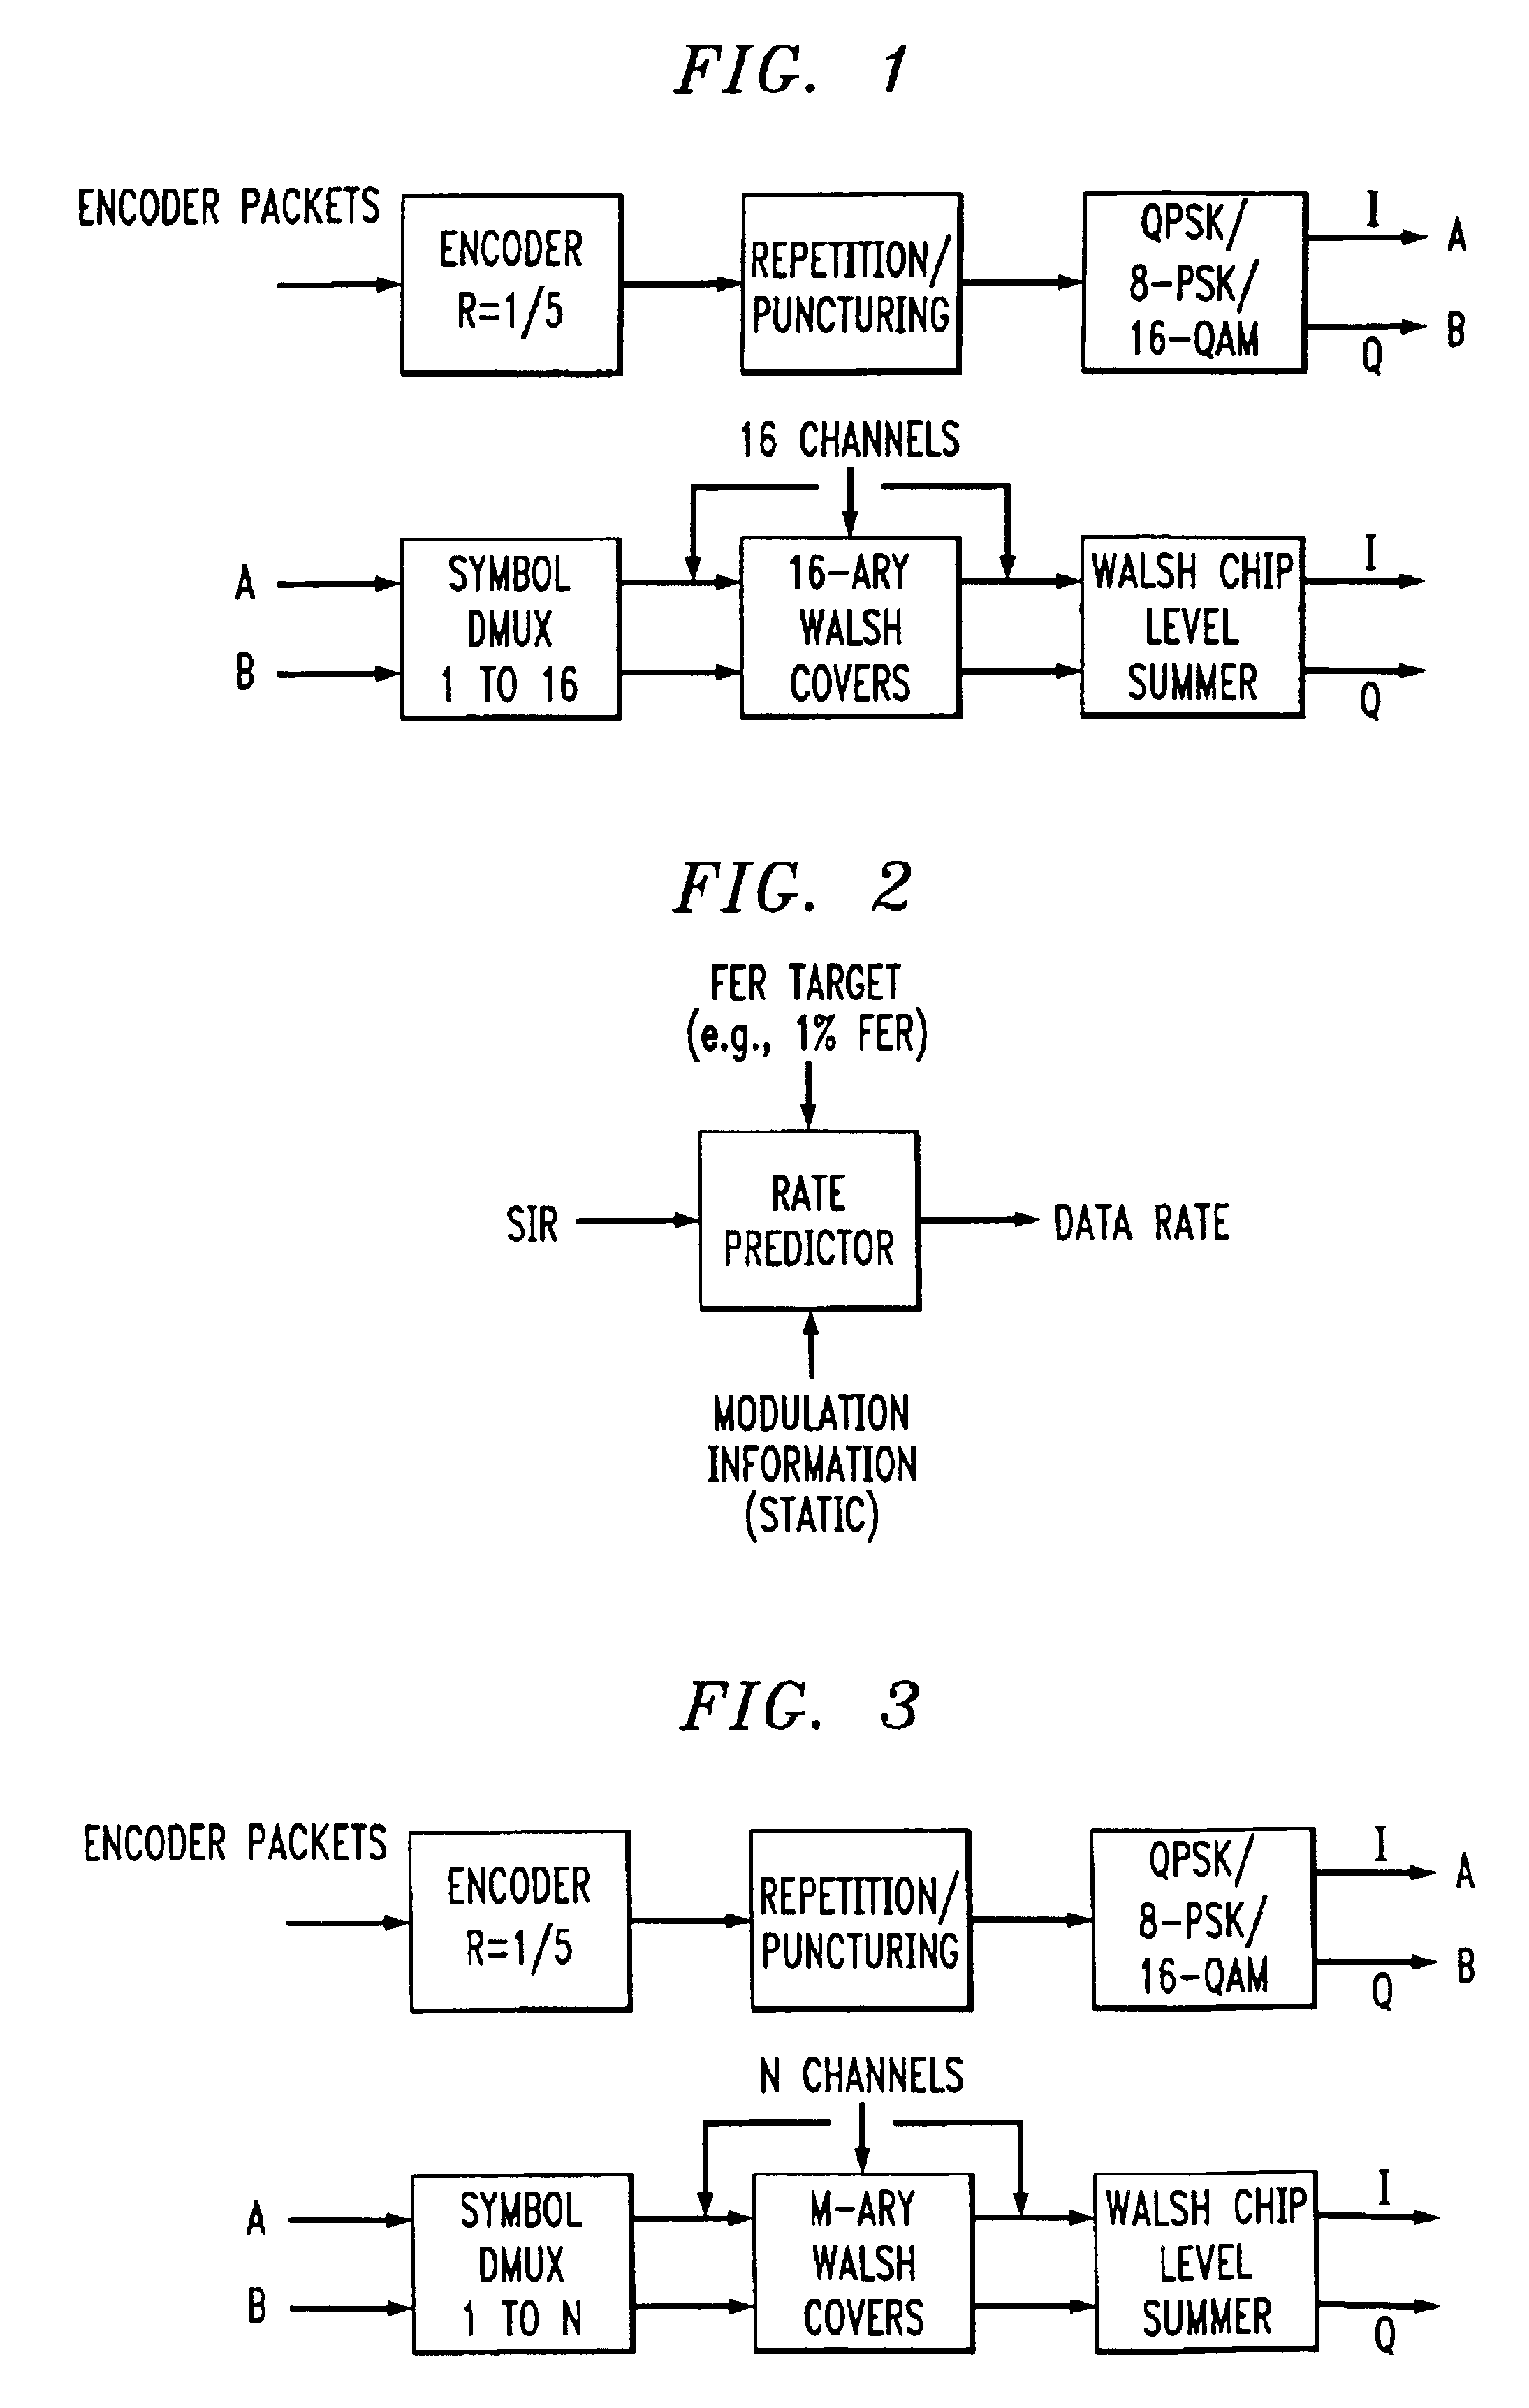 Method for data rate selection in a wireless communication system